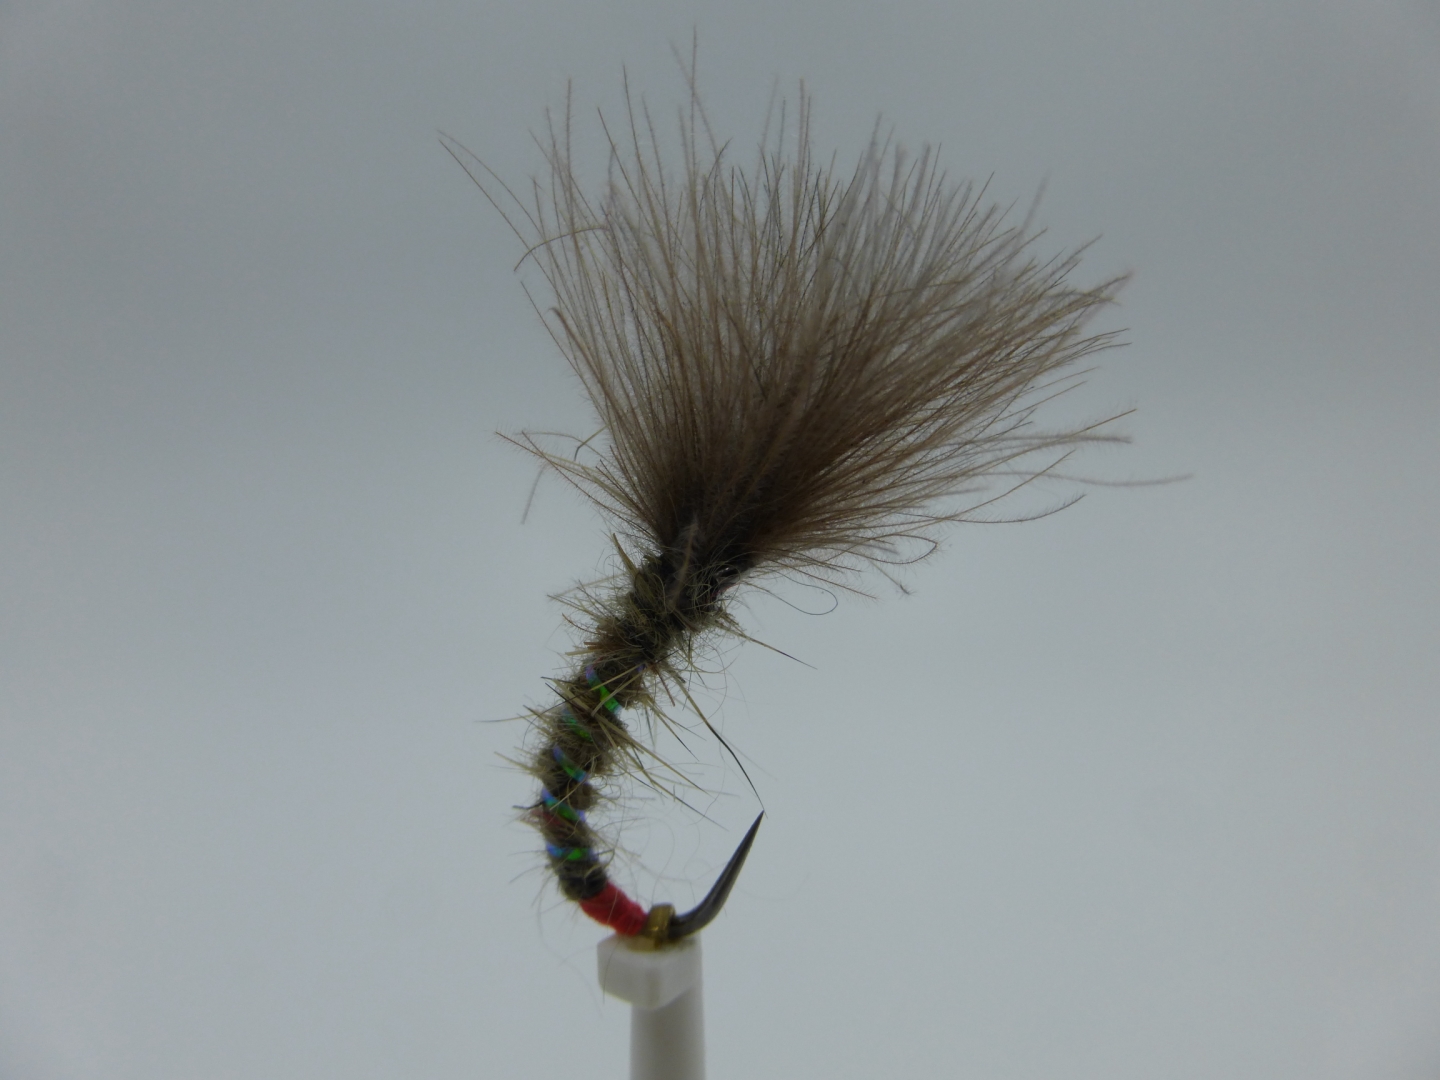 Size 12 CDC Owl Hare,s Ear Barbless